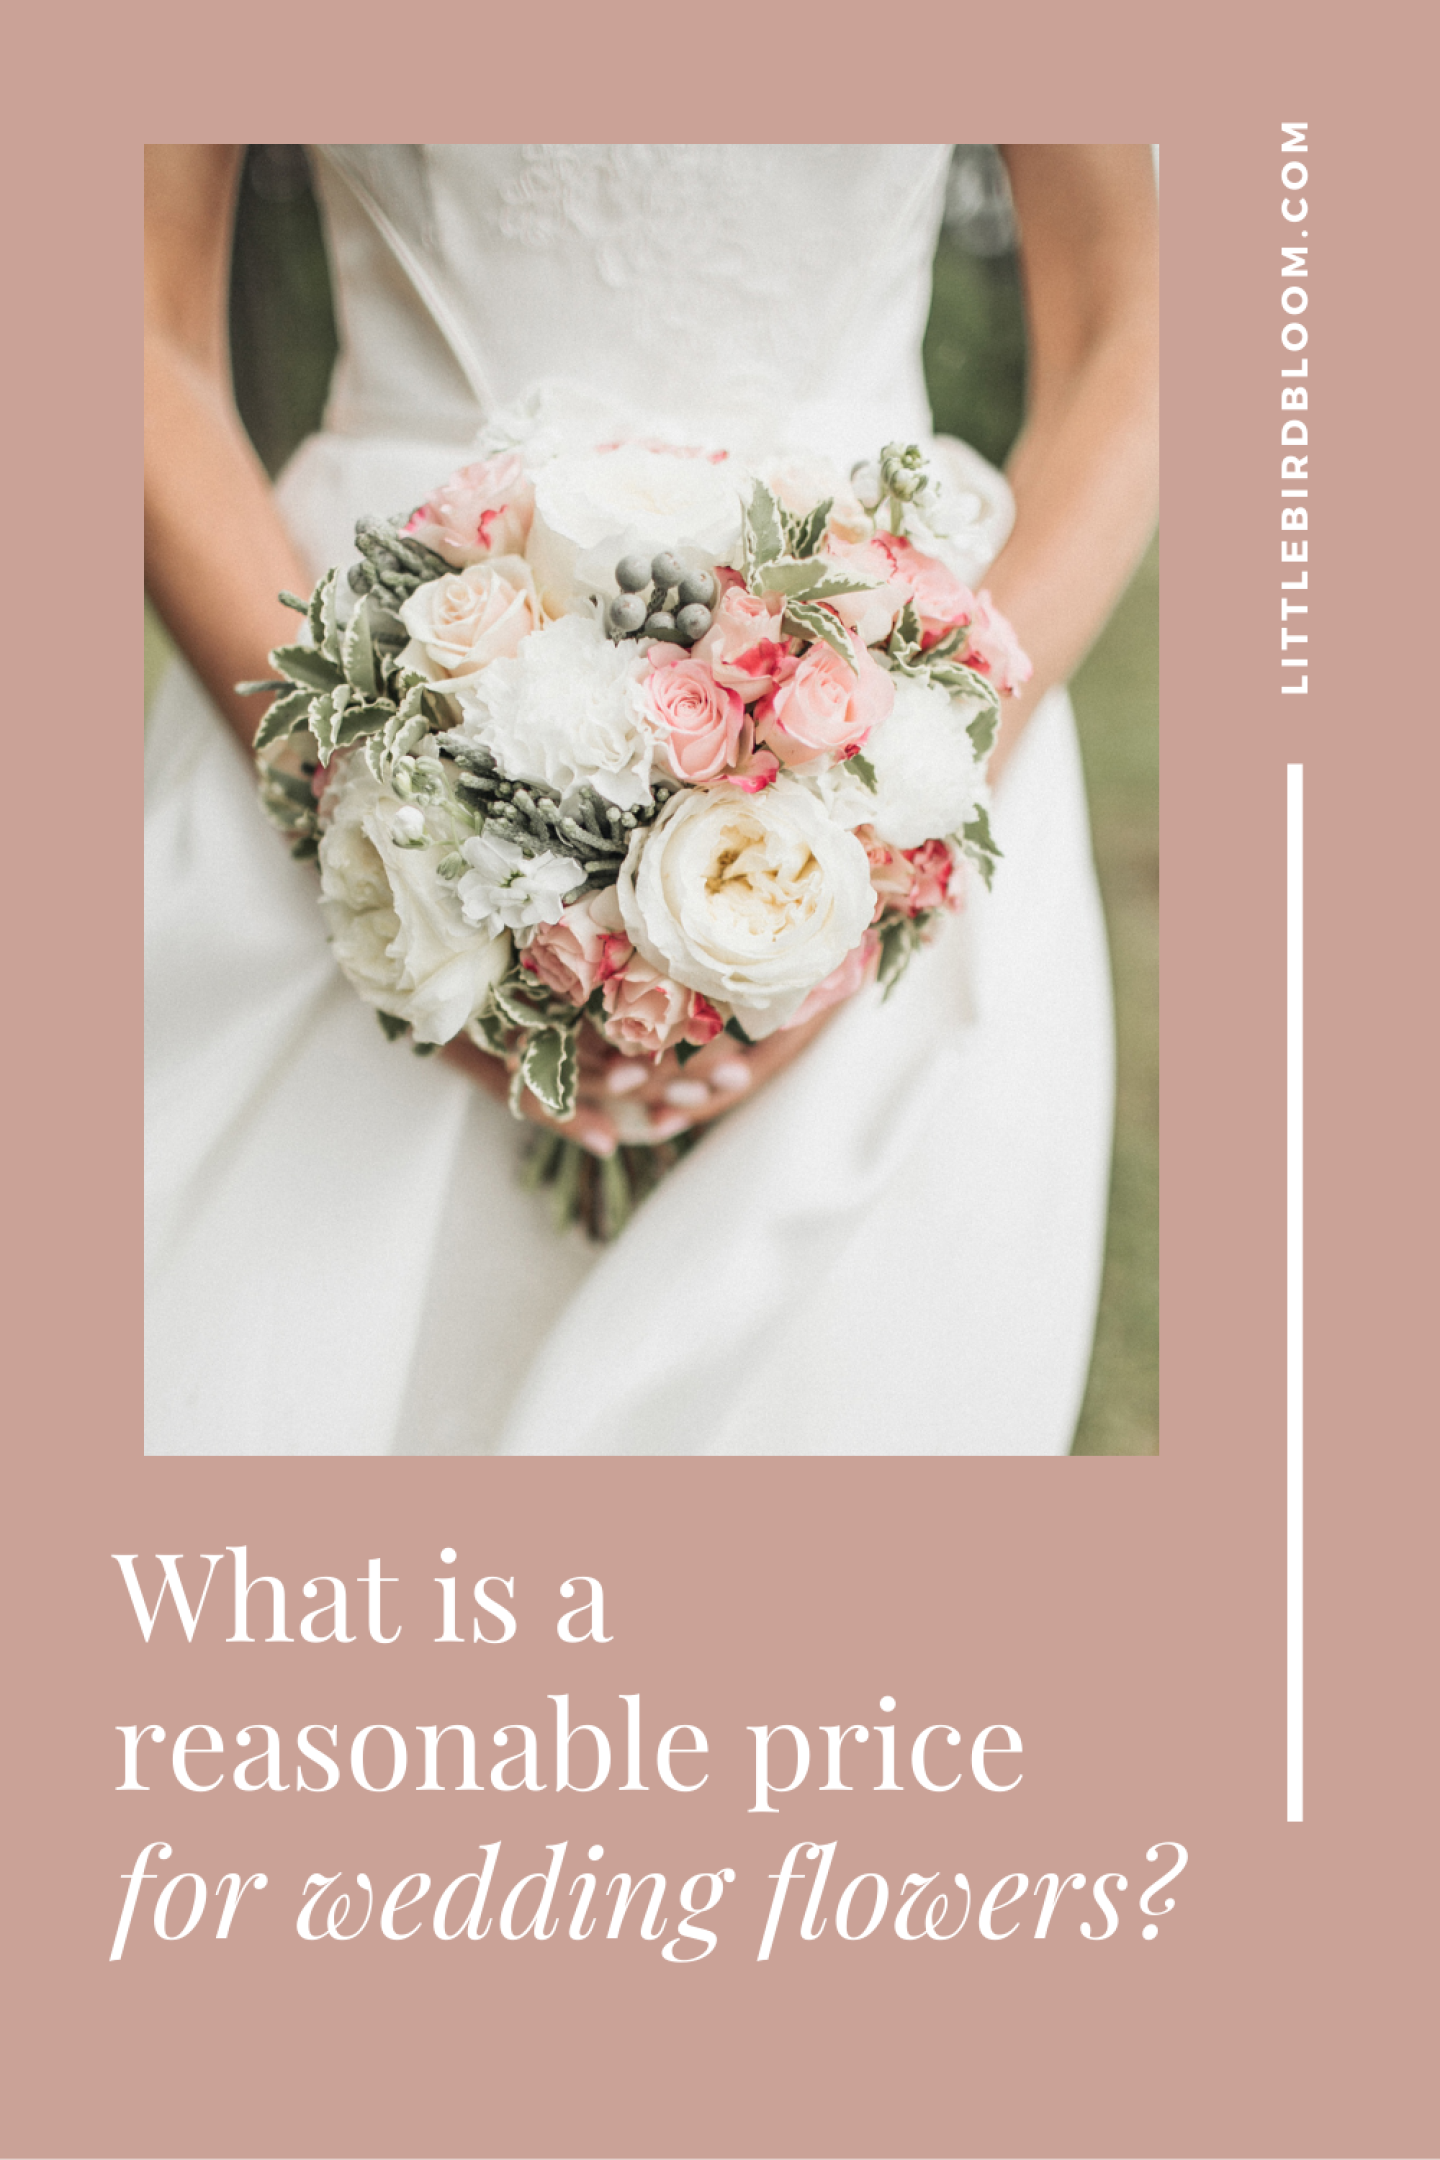 What is a reasonable price for wedding flowers?